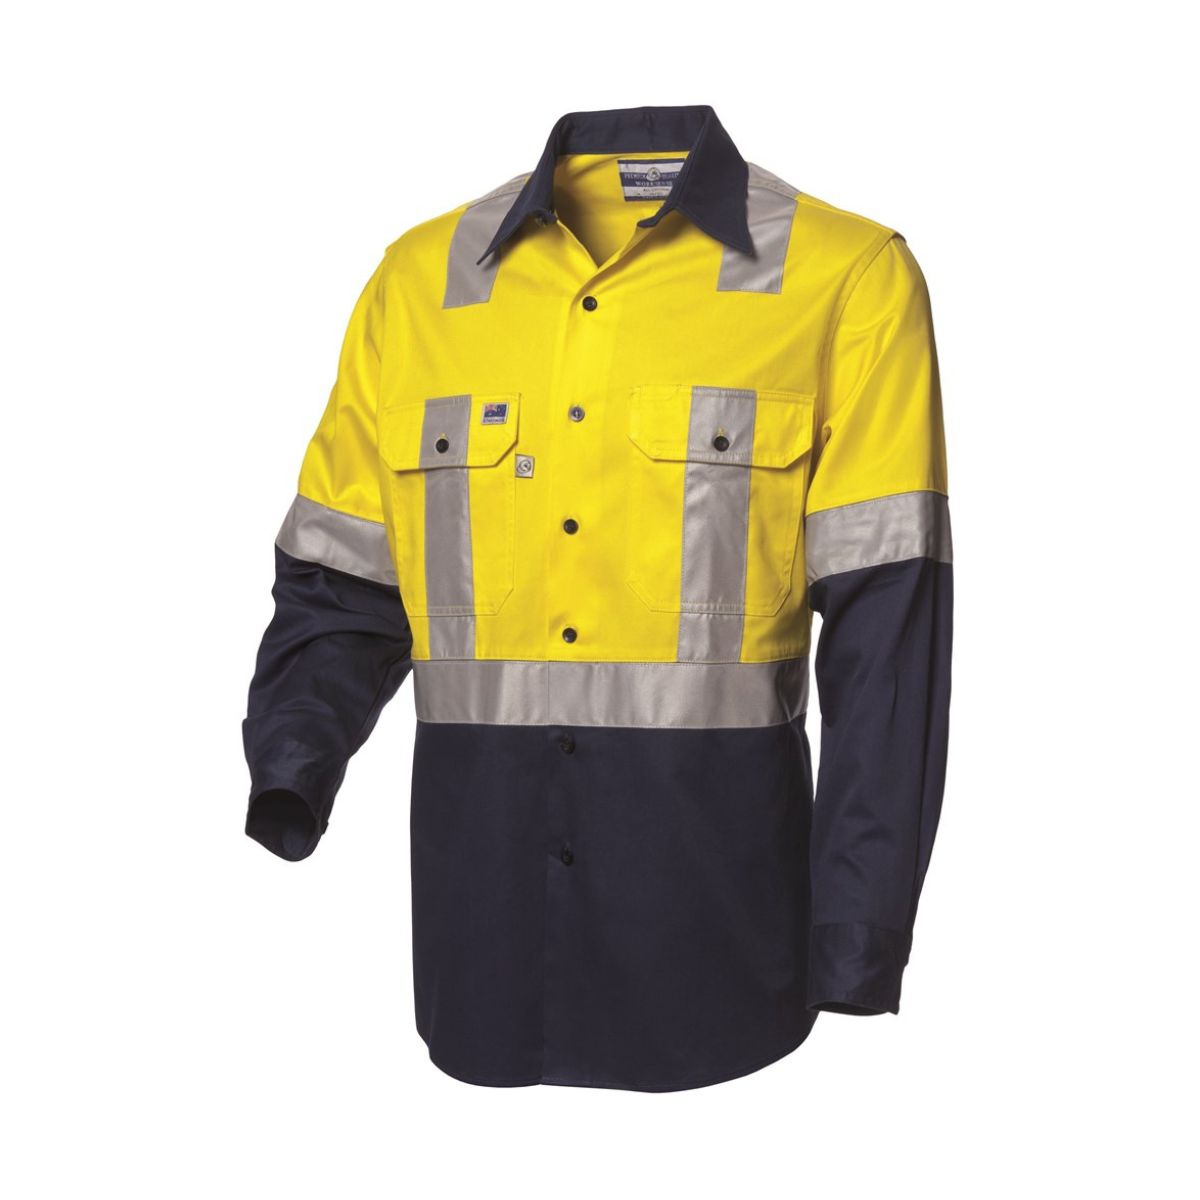 Beaver Men's Hi-Vis Button-Up Shirt with H-Reflective Tape WS9586498YN-XL